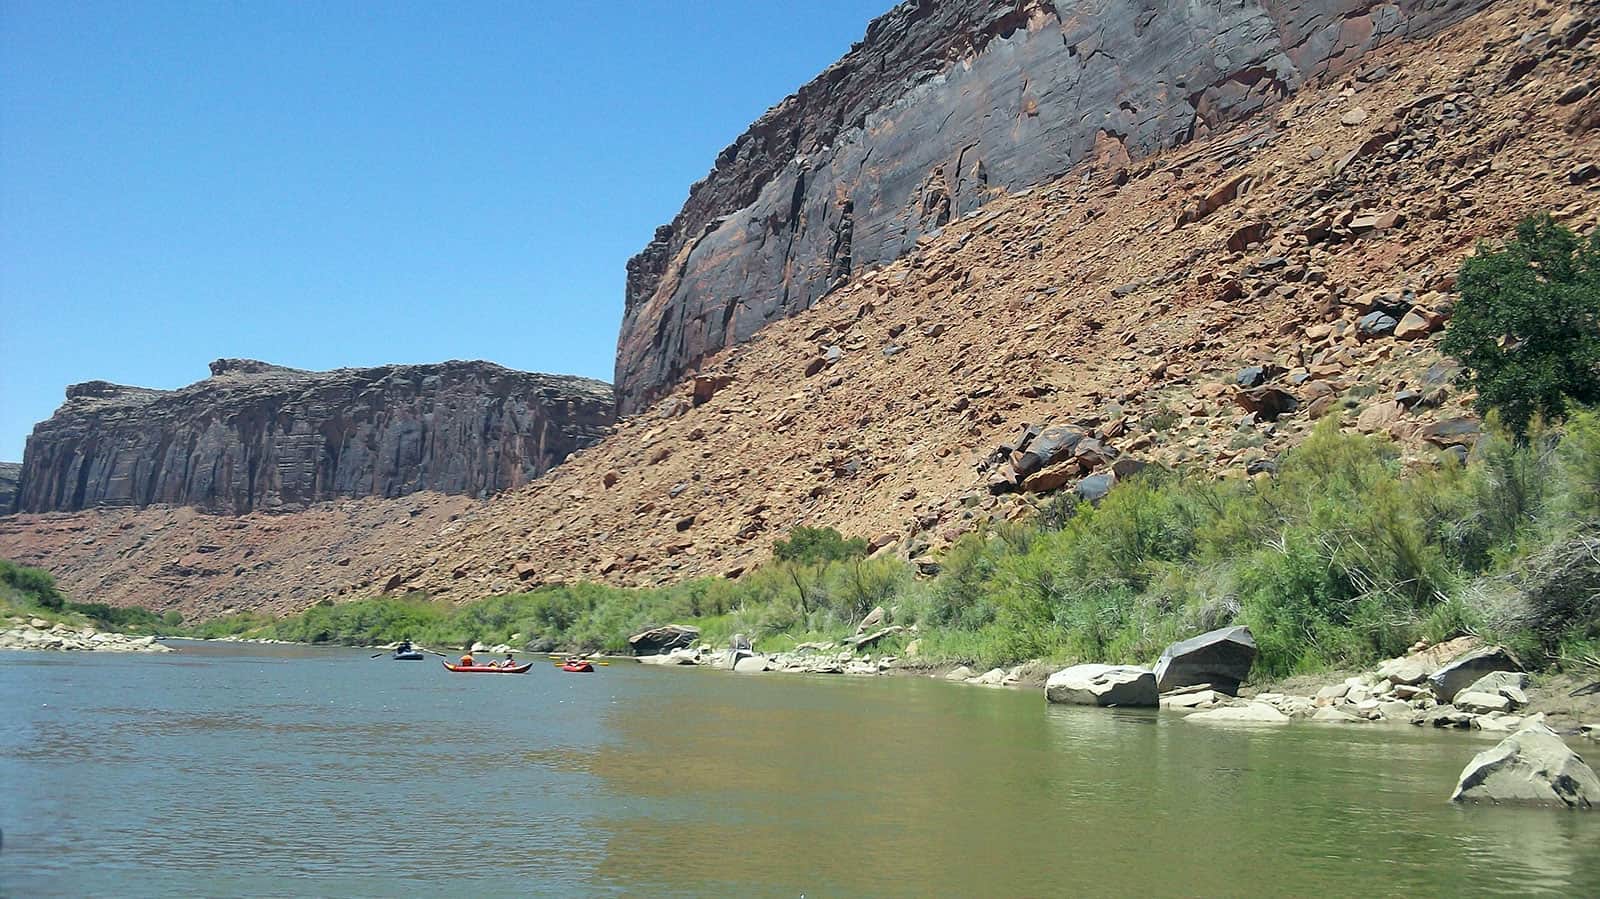 Rafting on the Colorado River 3